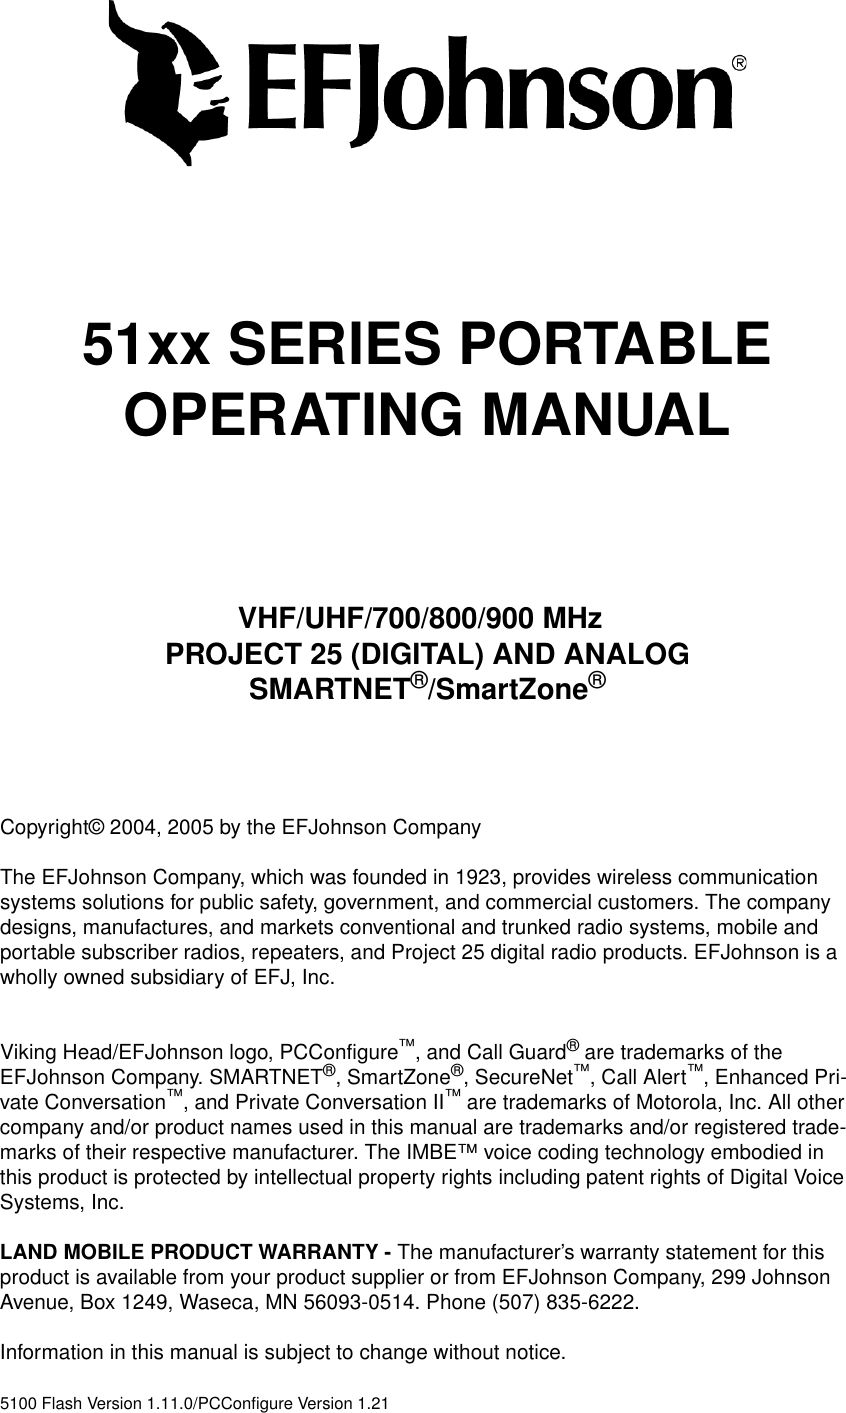 51xx SERIES PORTABLEOPERATING MANUALVHF/UHF/700/800/900 MHzPROJECT 25 (DIGITAL) AND ANALOGSMARTNET®/SmartZone®Copyright© 2004, 2005 by the EFJohnson CompanyThe EFJohnson Company, which was founded in 1923, provides wireless communication systems solutions for public safety, government, and commercial customers. The company designs, manufactures, and markets conventional and trunked radio systems, mobile and portable subscriber radios, repeaters, and Project 25 digital radio products. EFJohnson is a wholly owned subsidiary of EFJ, Inc.Viking Head/EFJohnson logo, PCConfigure™, and Call Guard® are trademarks of the EFJohnson Company. SMARTNET®, SmartZone®, SecureNet™, Call Alert™, Enhanced Pri-vate Conversation™, and Private Conversation II™ are trademarks of Motorola, Inc. All other company and/or product names used in this manual are trademarks and/or registered trade-marks of their respective manufacturer. The IMBE™ voice coding technology embodied in this product is protected by intellectual property rights including patent rights of Digital Voice Systems, Inc.LAND MOBILE PRODUCT WARRANTY - The manufacturer’s warranty statement for this product is available from your product supplier or from EFJohnson Company, 299 Johnson Avenue, Box 1249, Waseca, MN 56093-0514. Phone (507) 835-6222.Information in this manual is subject to change without notice. 5100 Flash Version 1.11.0/PCConfigure Version 1.21